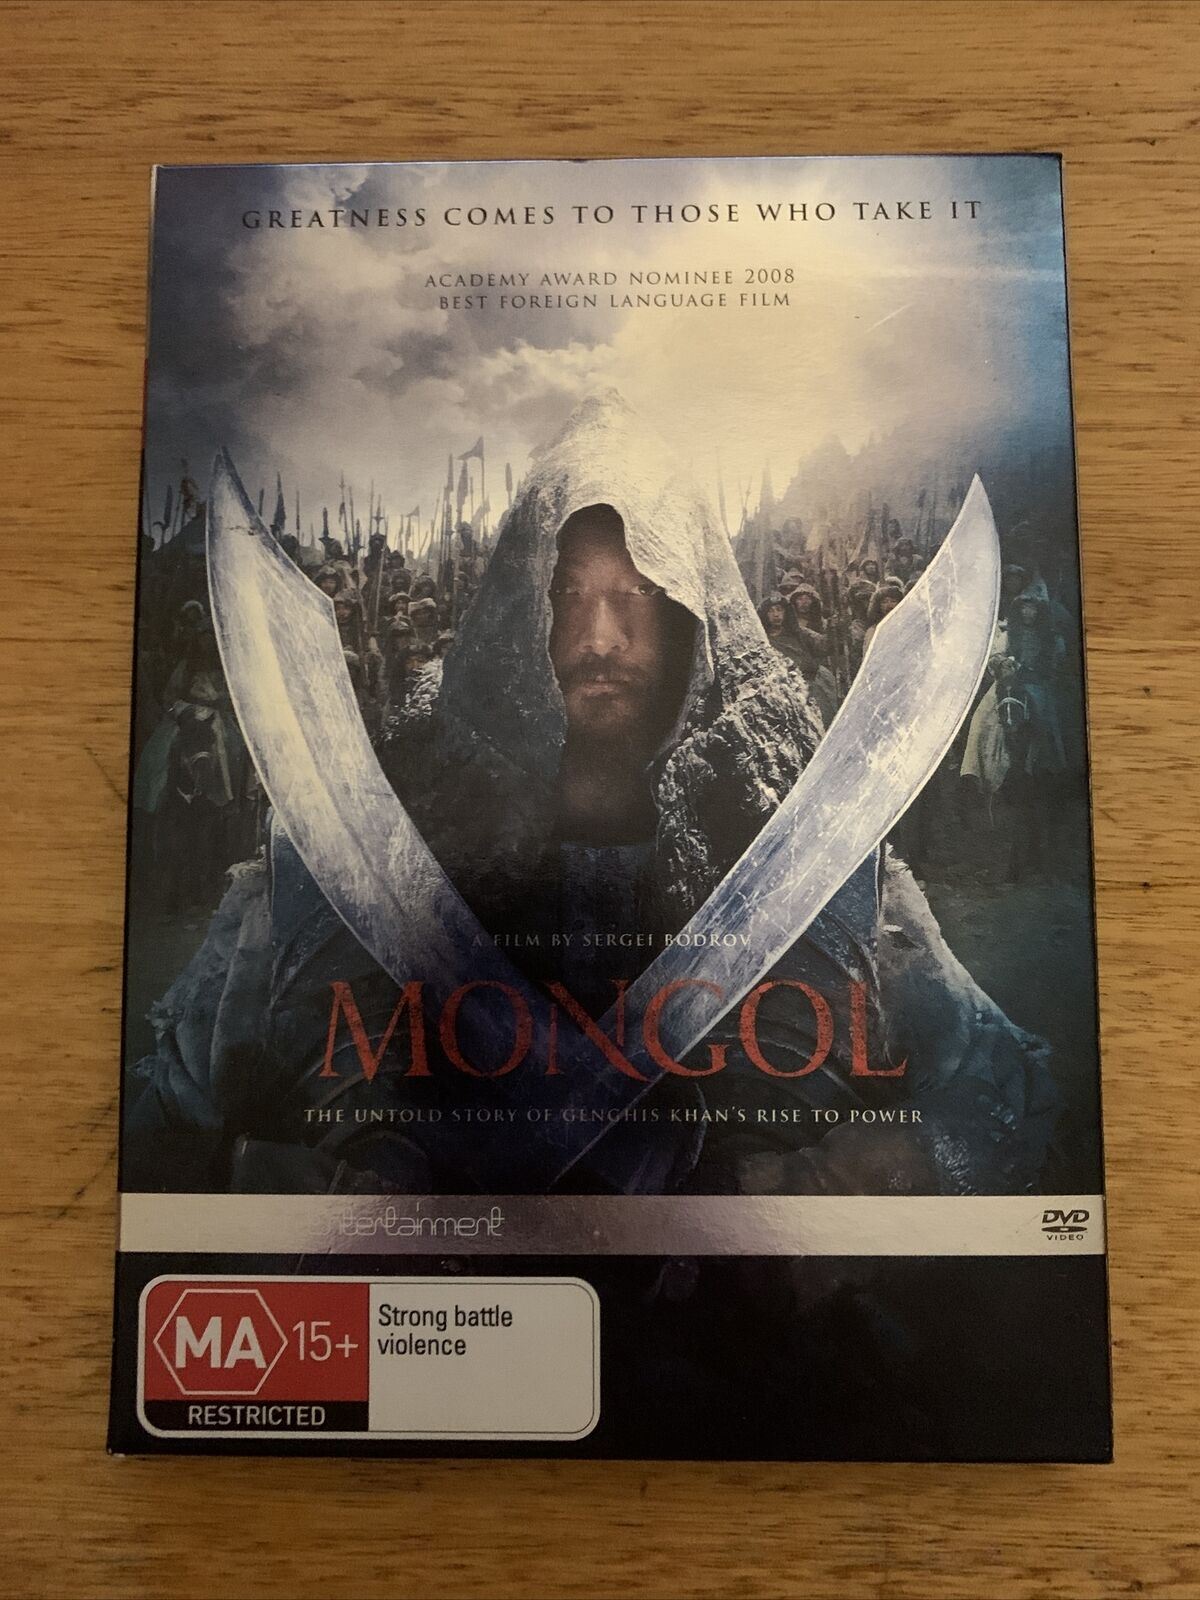 Mongol - Collector's Edition with Postcards (DVD, 2007) Story of Ghenghis Khan